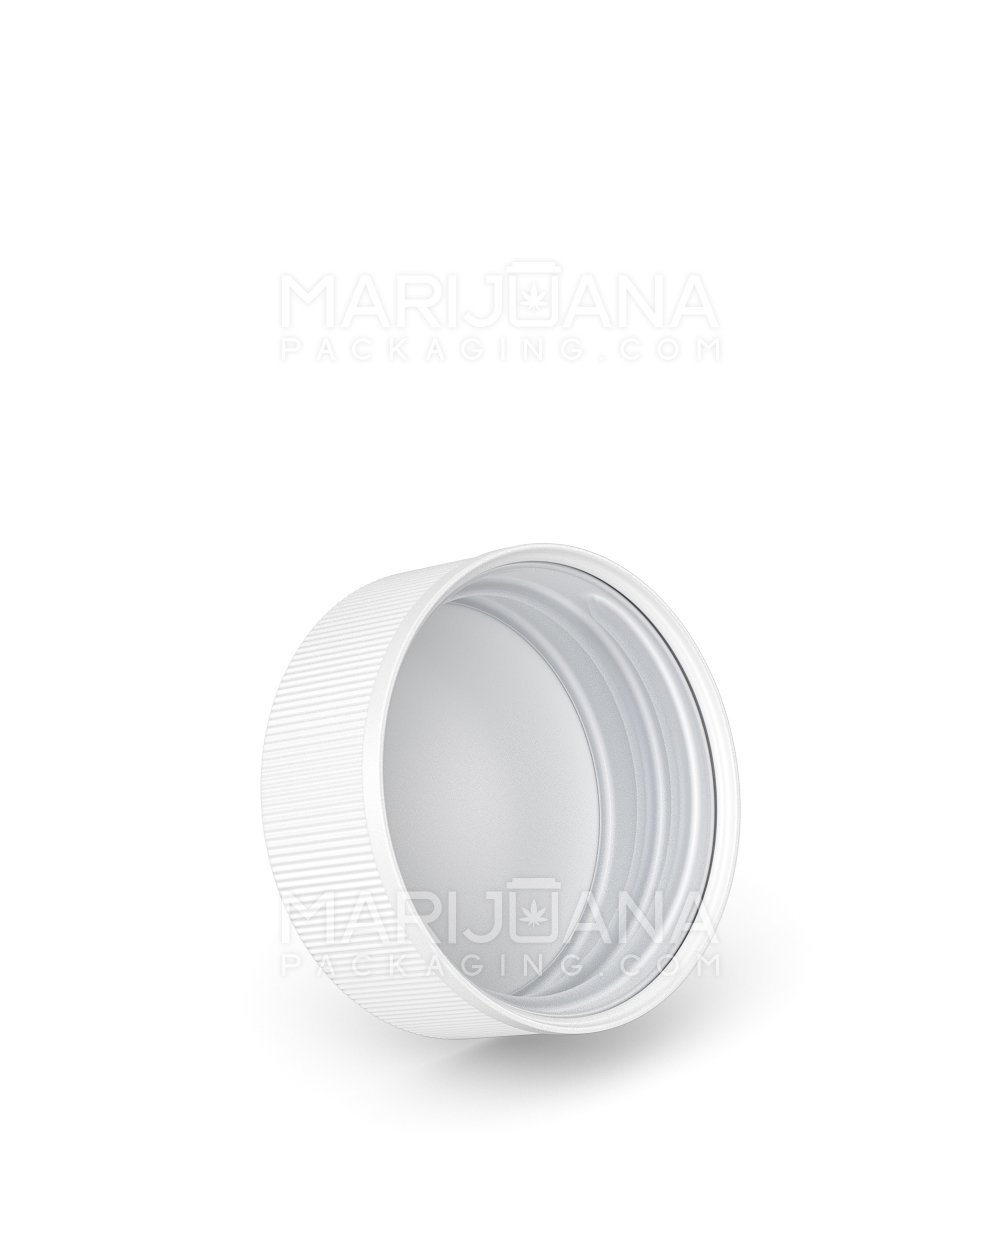 Child Resistant | Ribbed Push Down & Turn Plastic Caps w/ Text & Foam Liner | 38mm - Semi Gloss White - 320 Count - 2